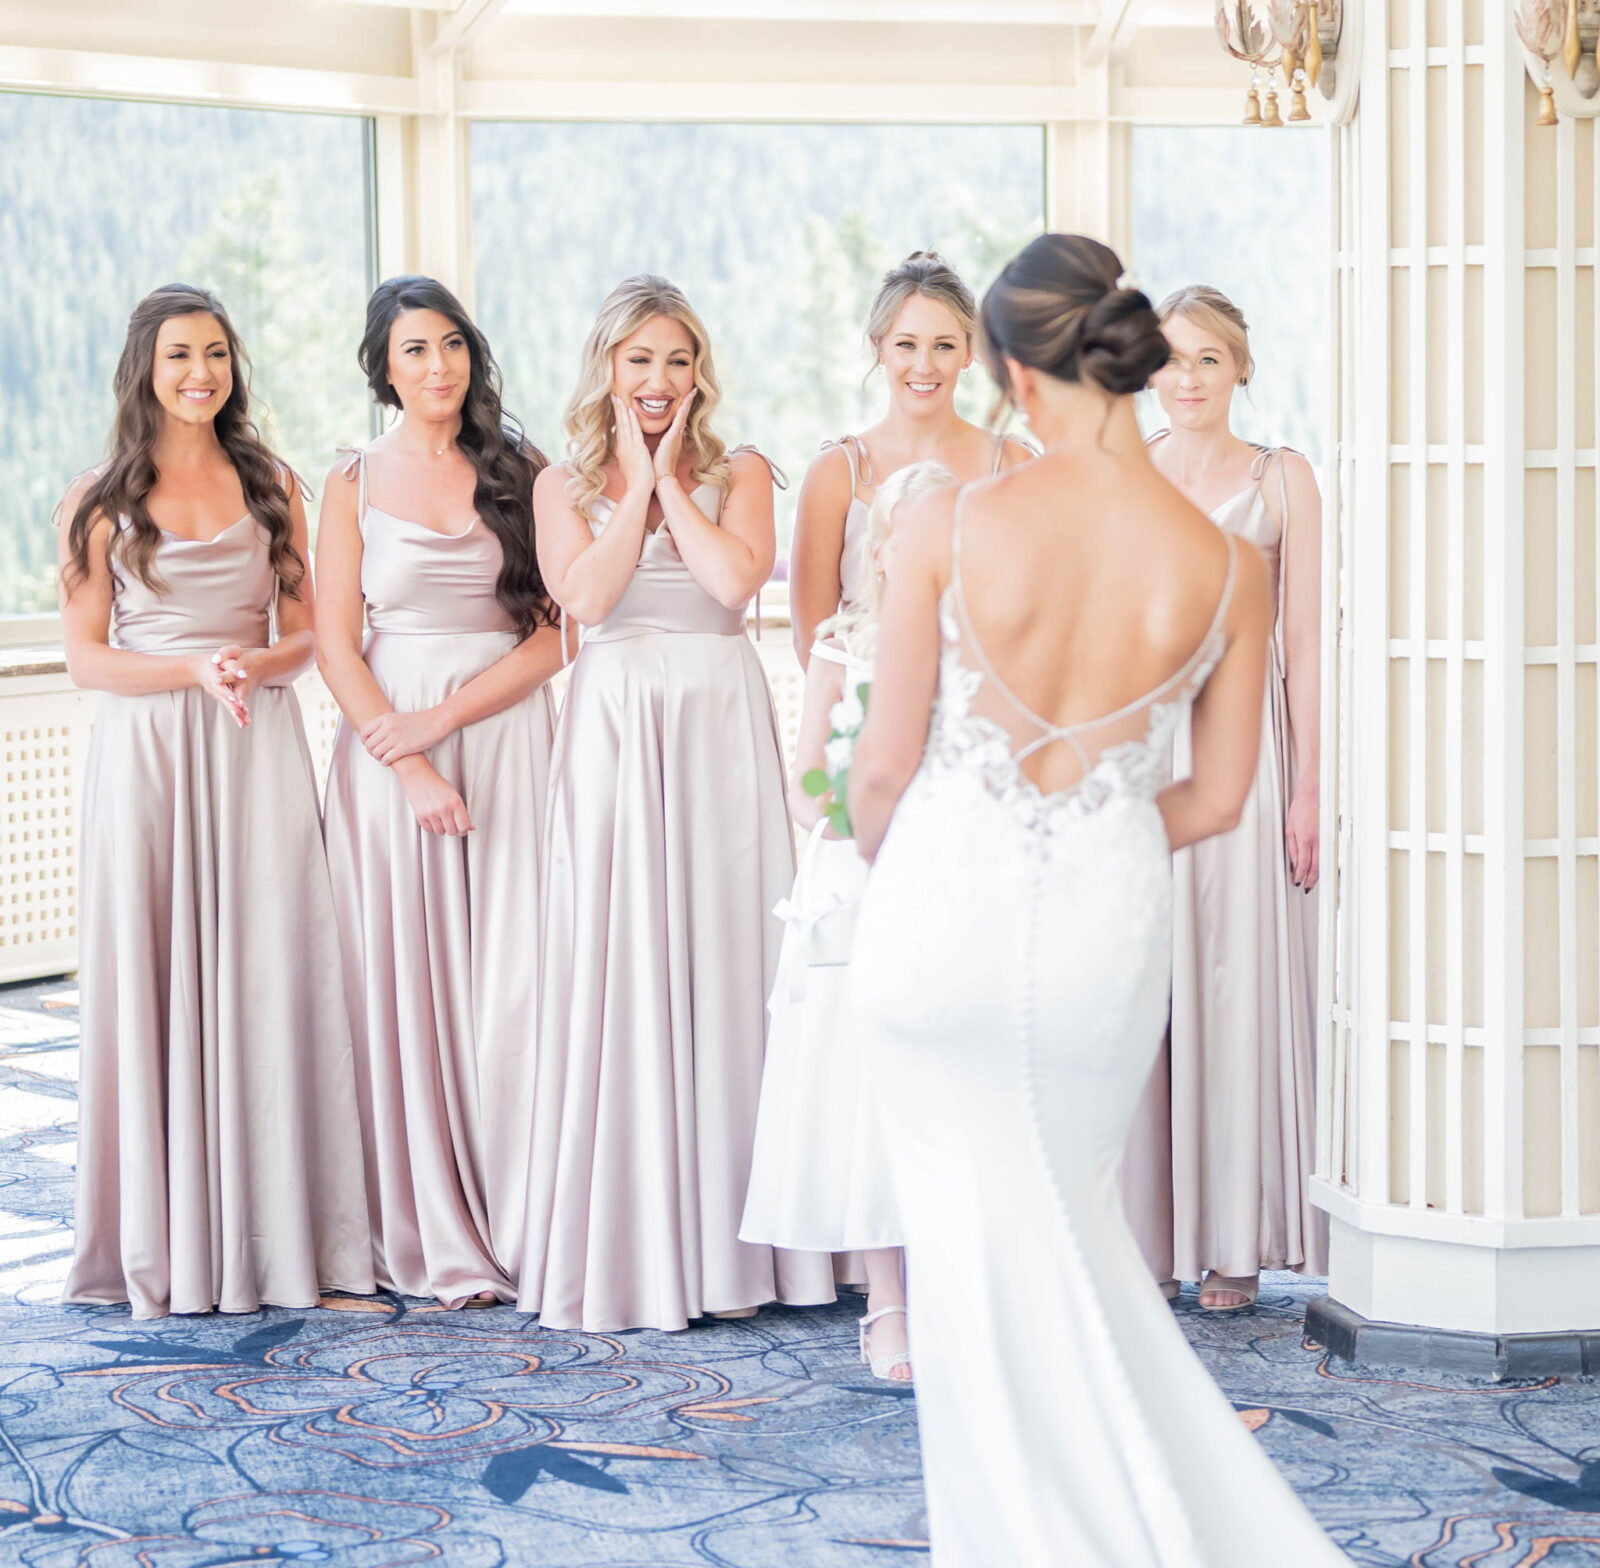 Bridesmaid first look reaction to the bride in elegant lace gown at the Fairmont Banff Springs. Floor length champagne coloured bridesmaid dress inspiration